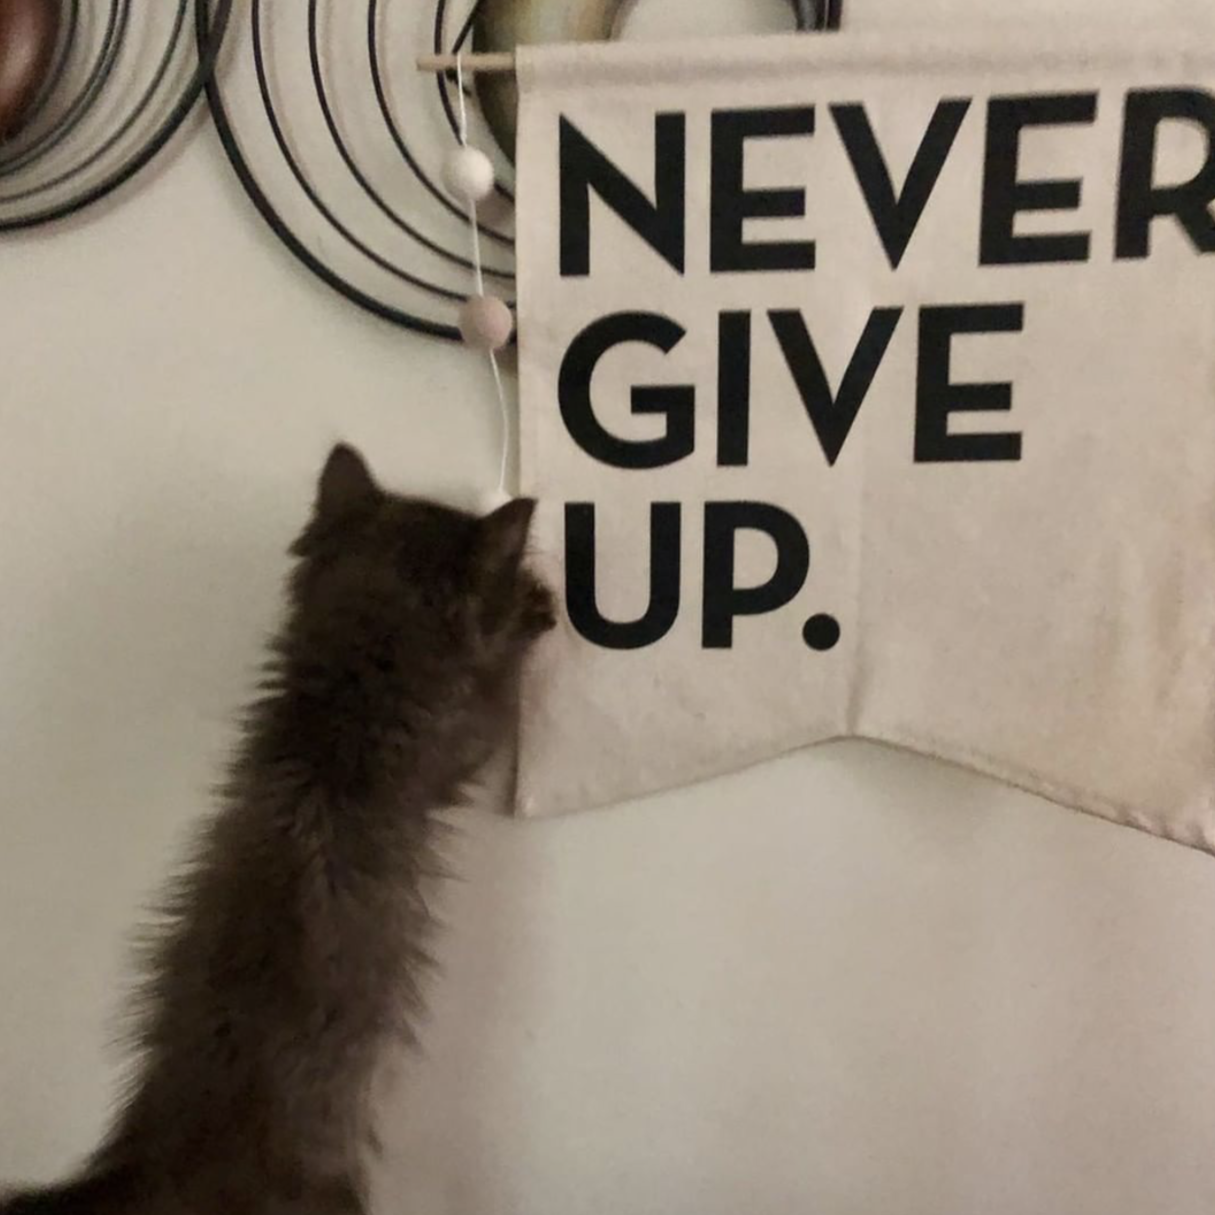 NEVER GIVE UP. CANVAS BANNER